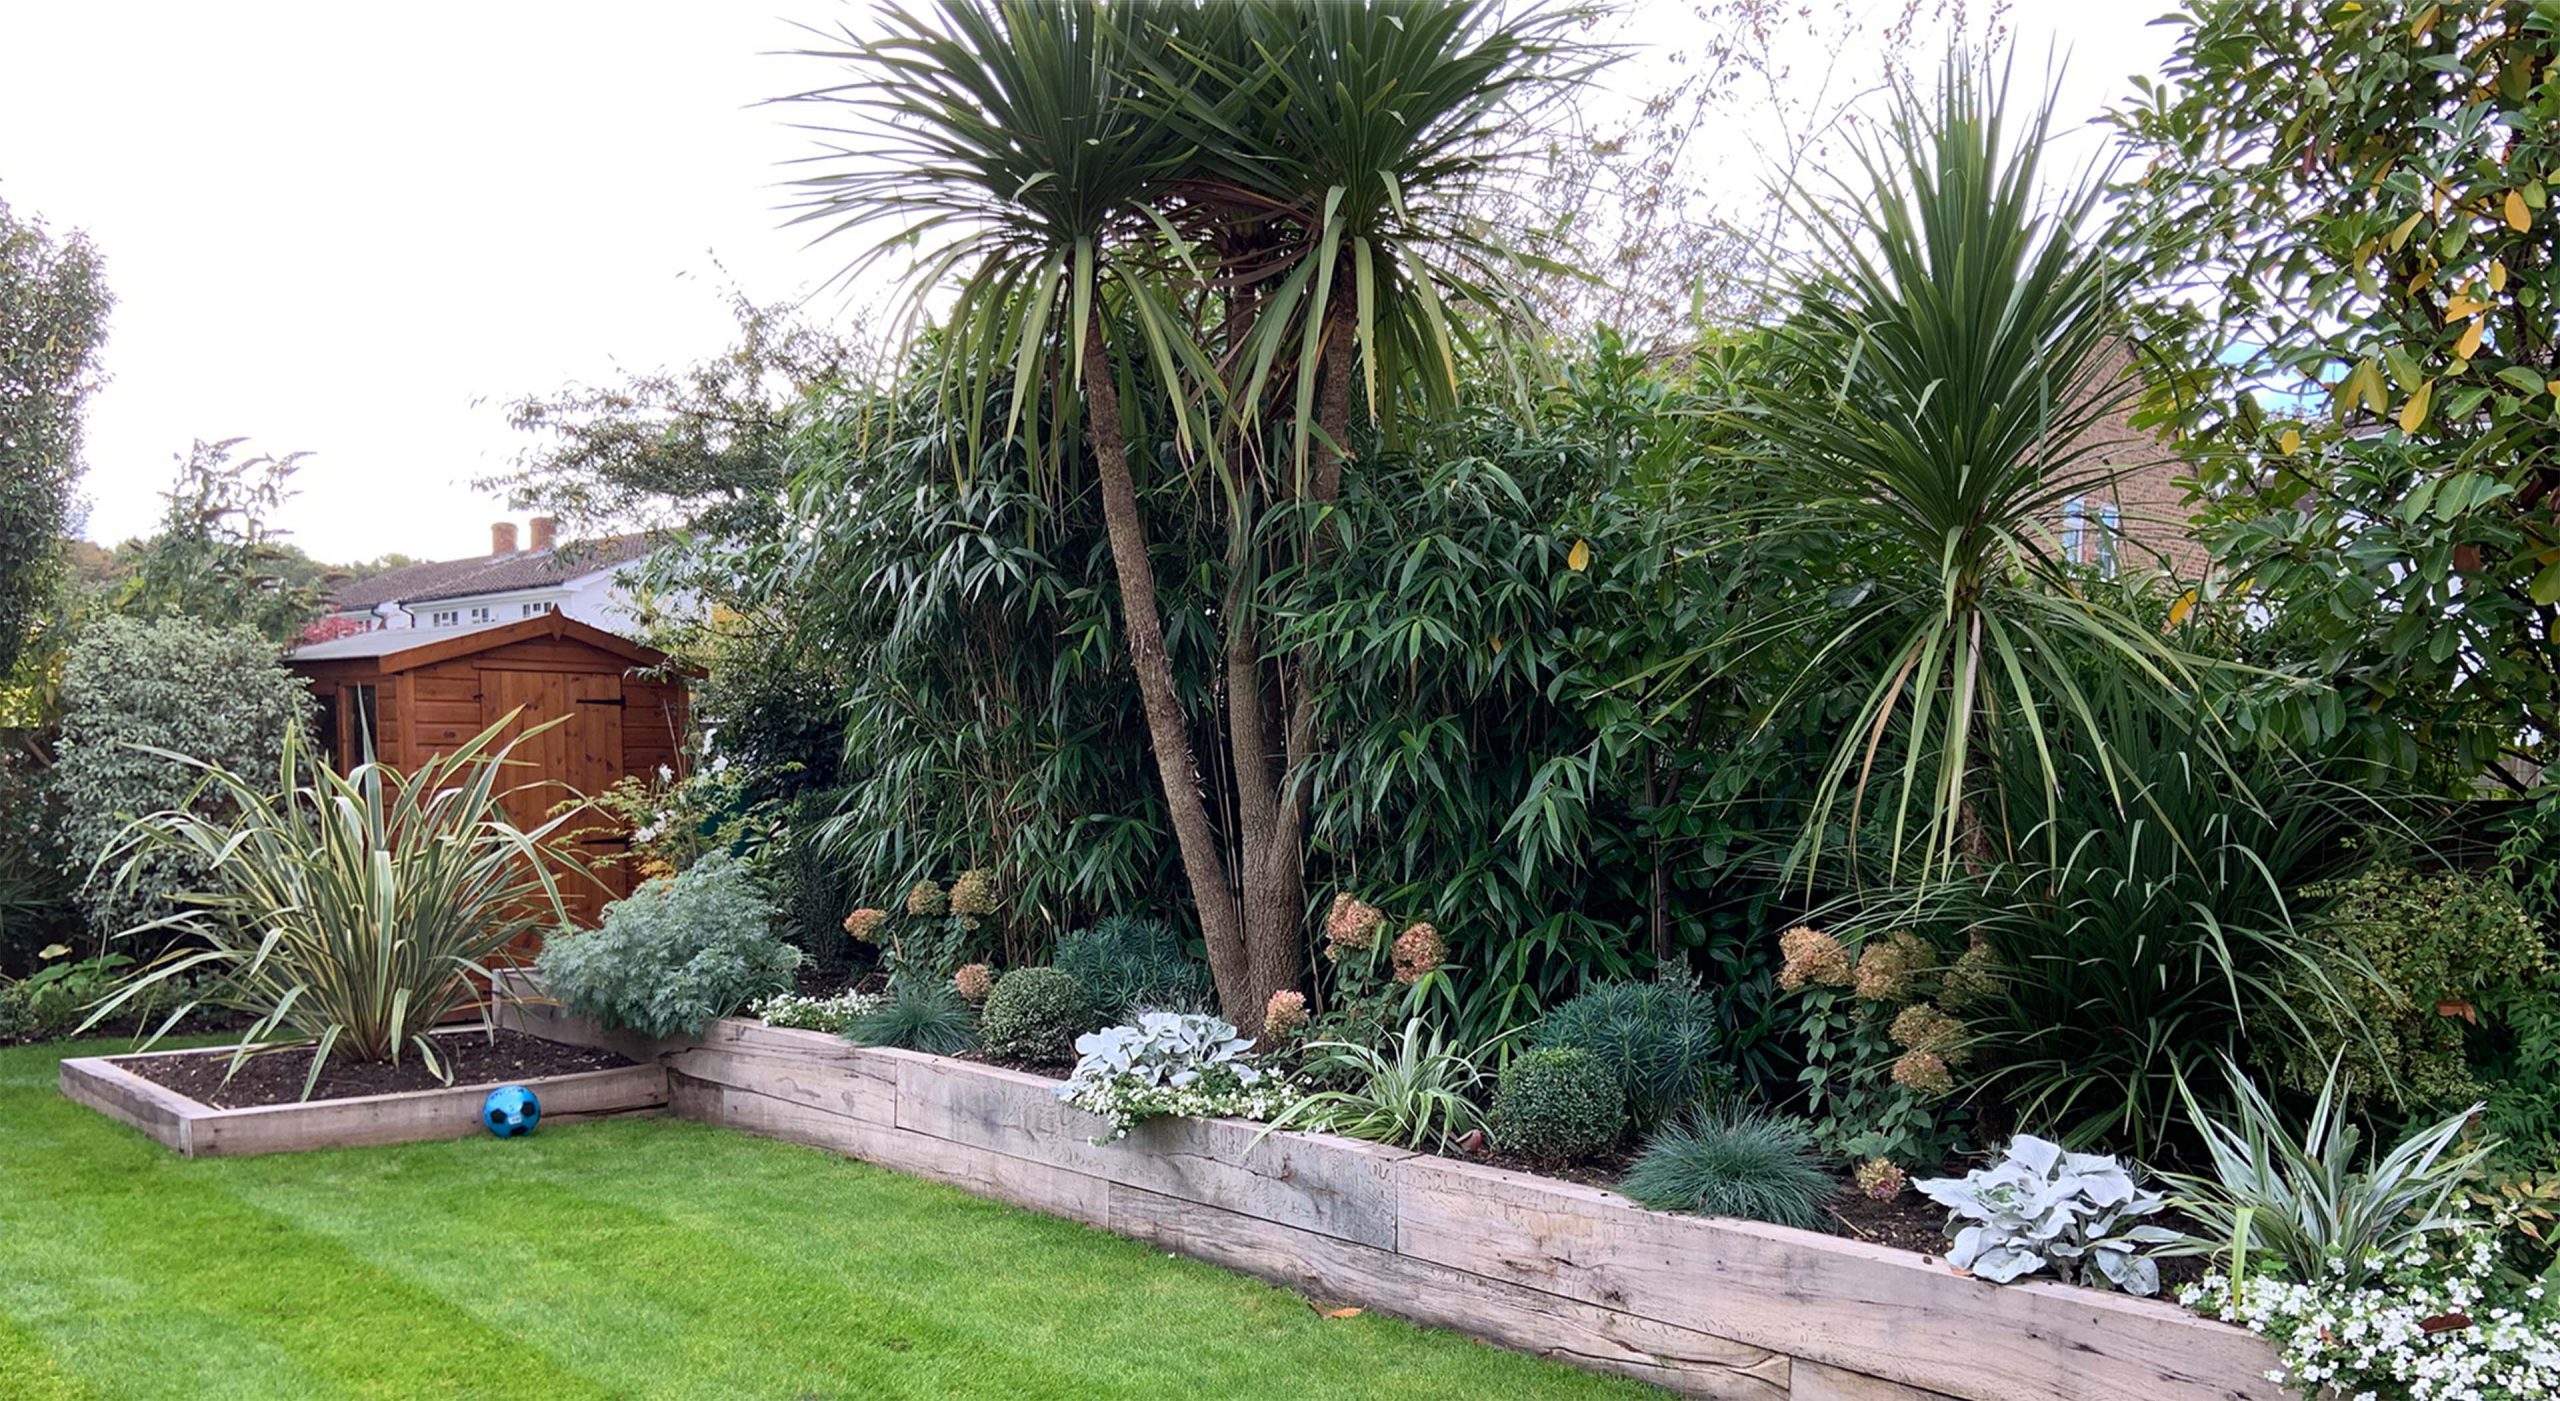 A well maintained garden edged with wooden sleepers